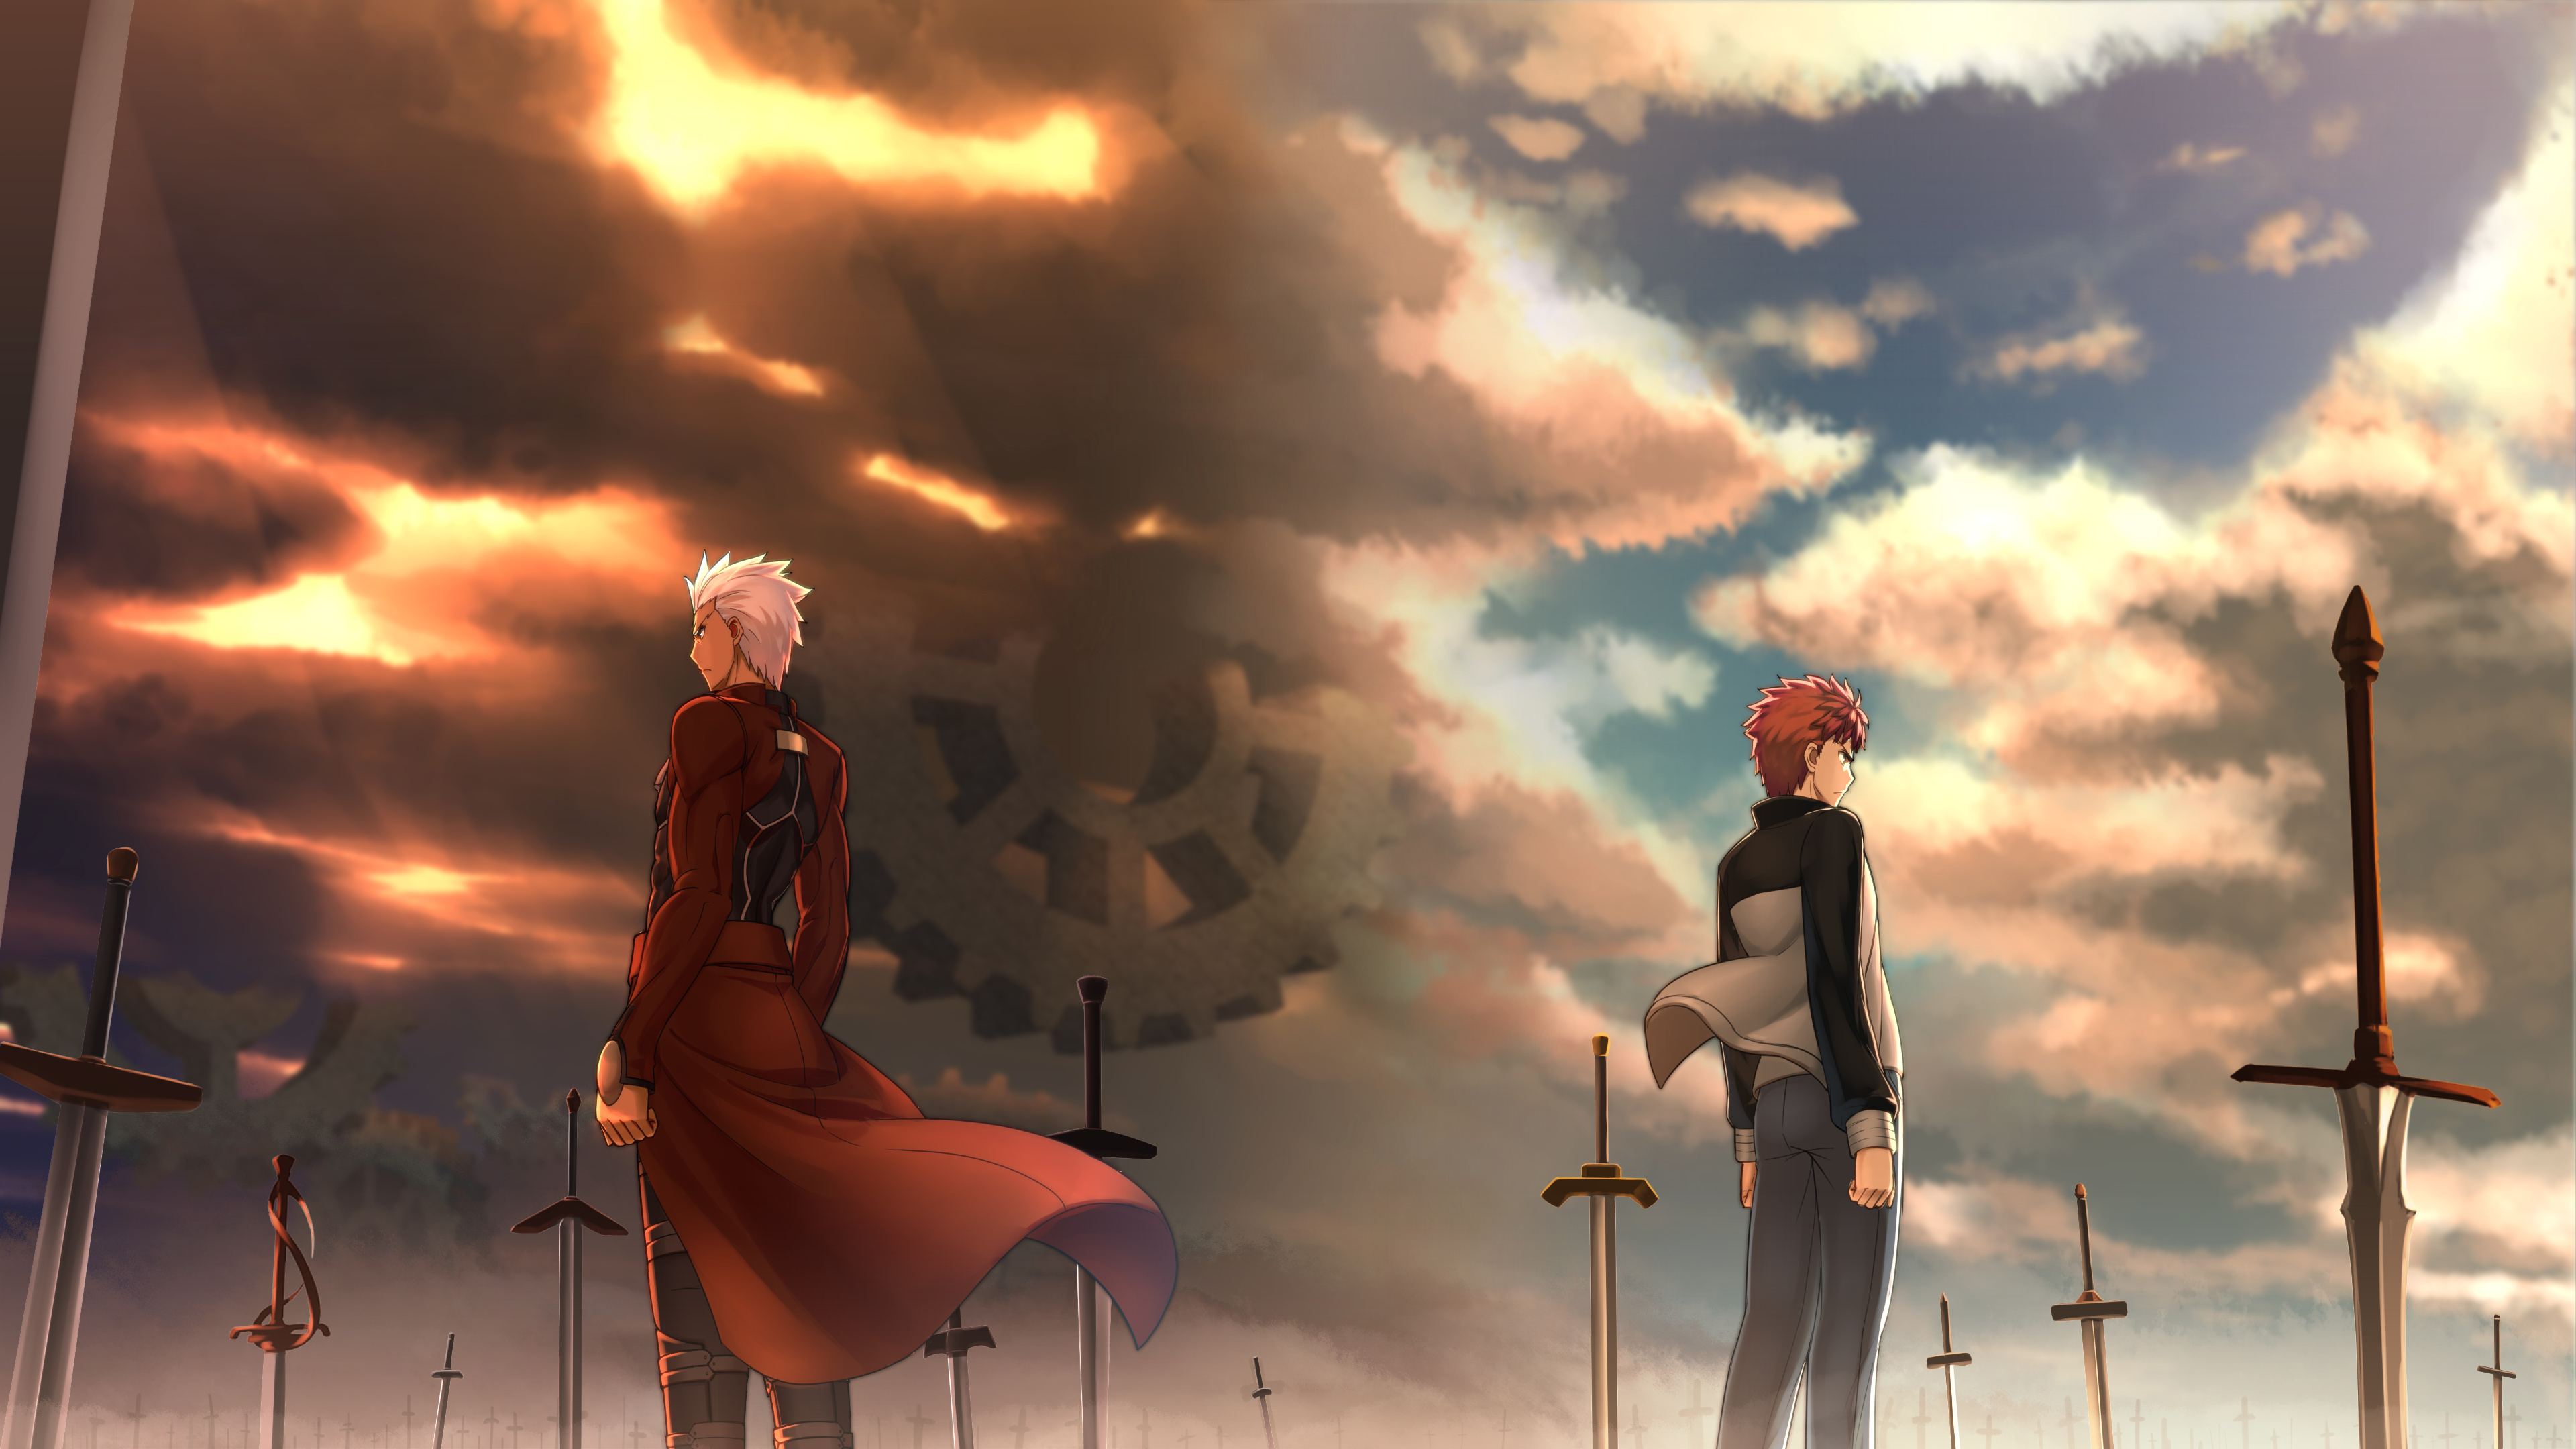 Fate/stay night, Unlimited Blade Works, HD wallpapers, Anime background, 3840x2160 4K Desktop